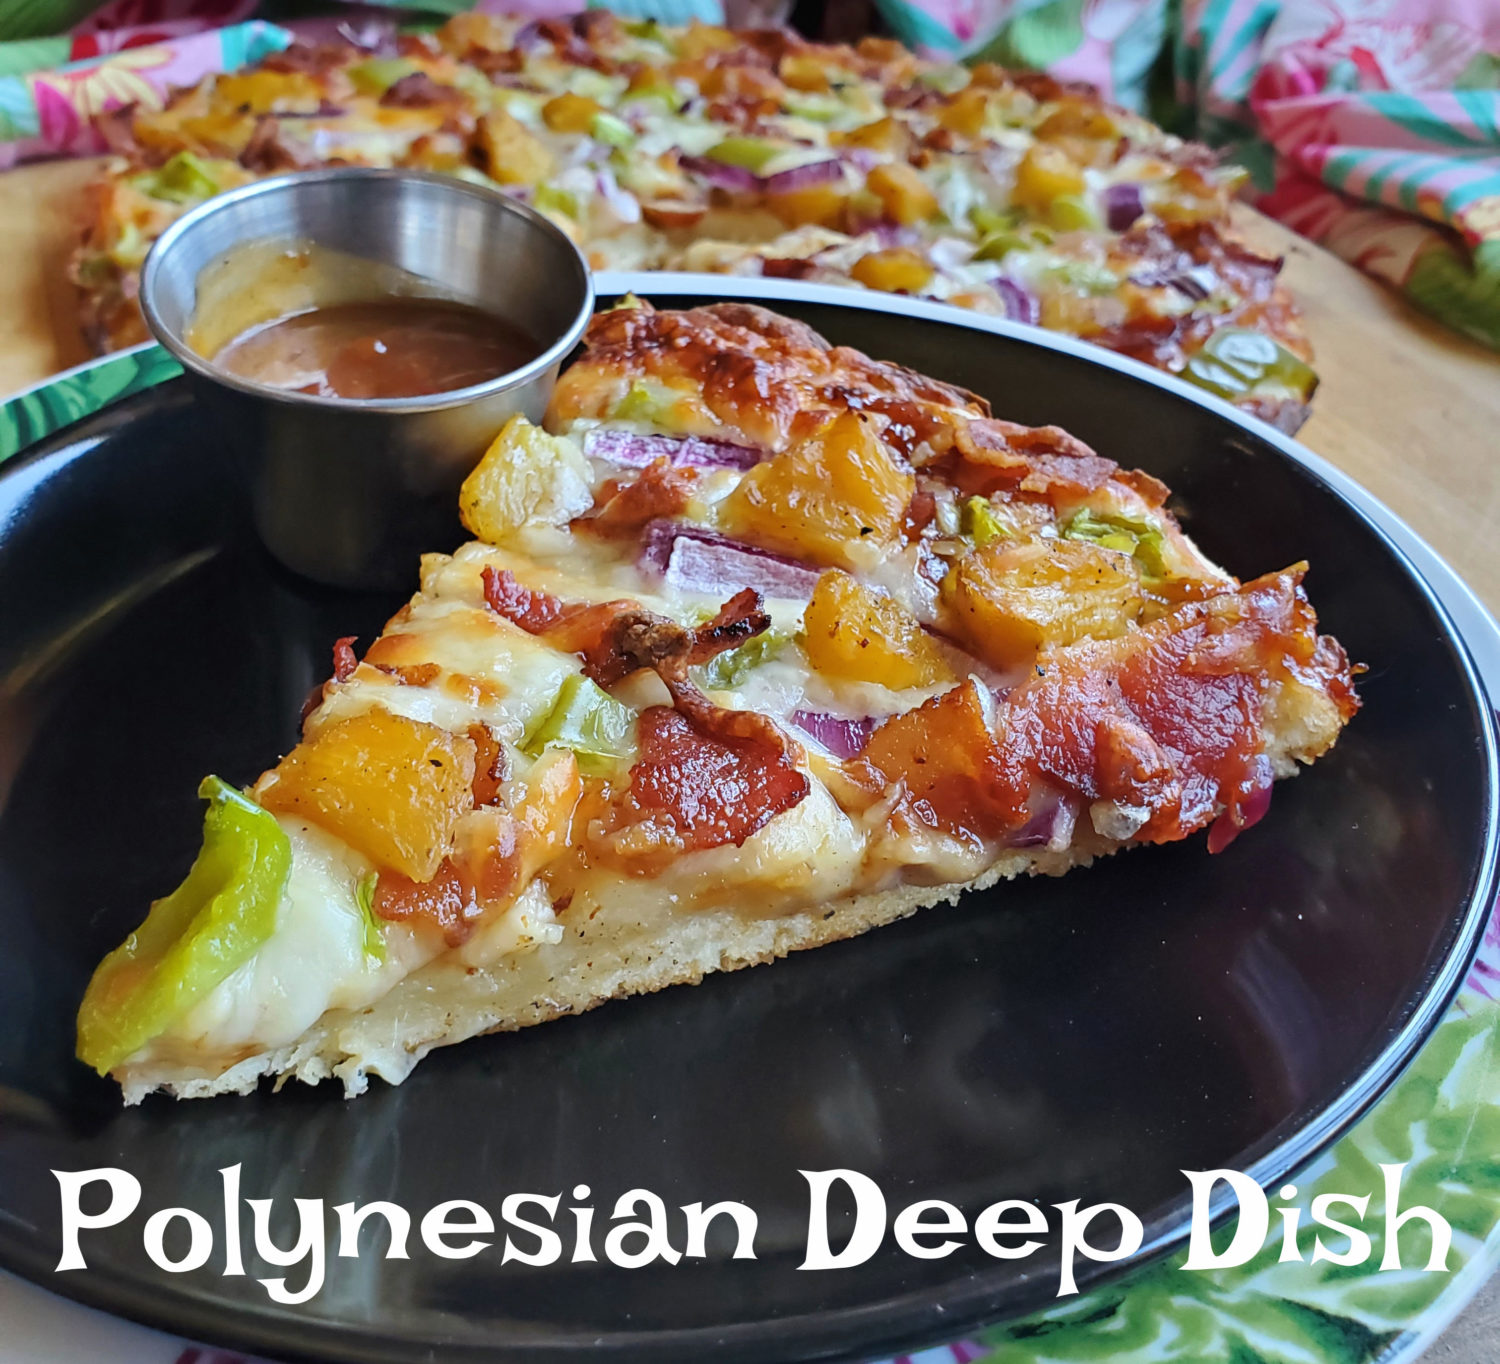 Polynesian Deep Dish Pizza: You will love the zingy sensation of Polynesian Sunrise Sauce with tangy green tomatoes, sweet pineapple tidbits, bacon & ham, truly a song of the islands!